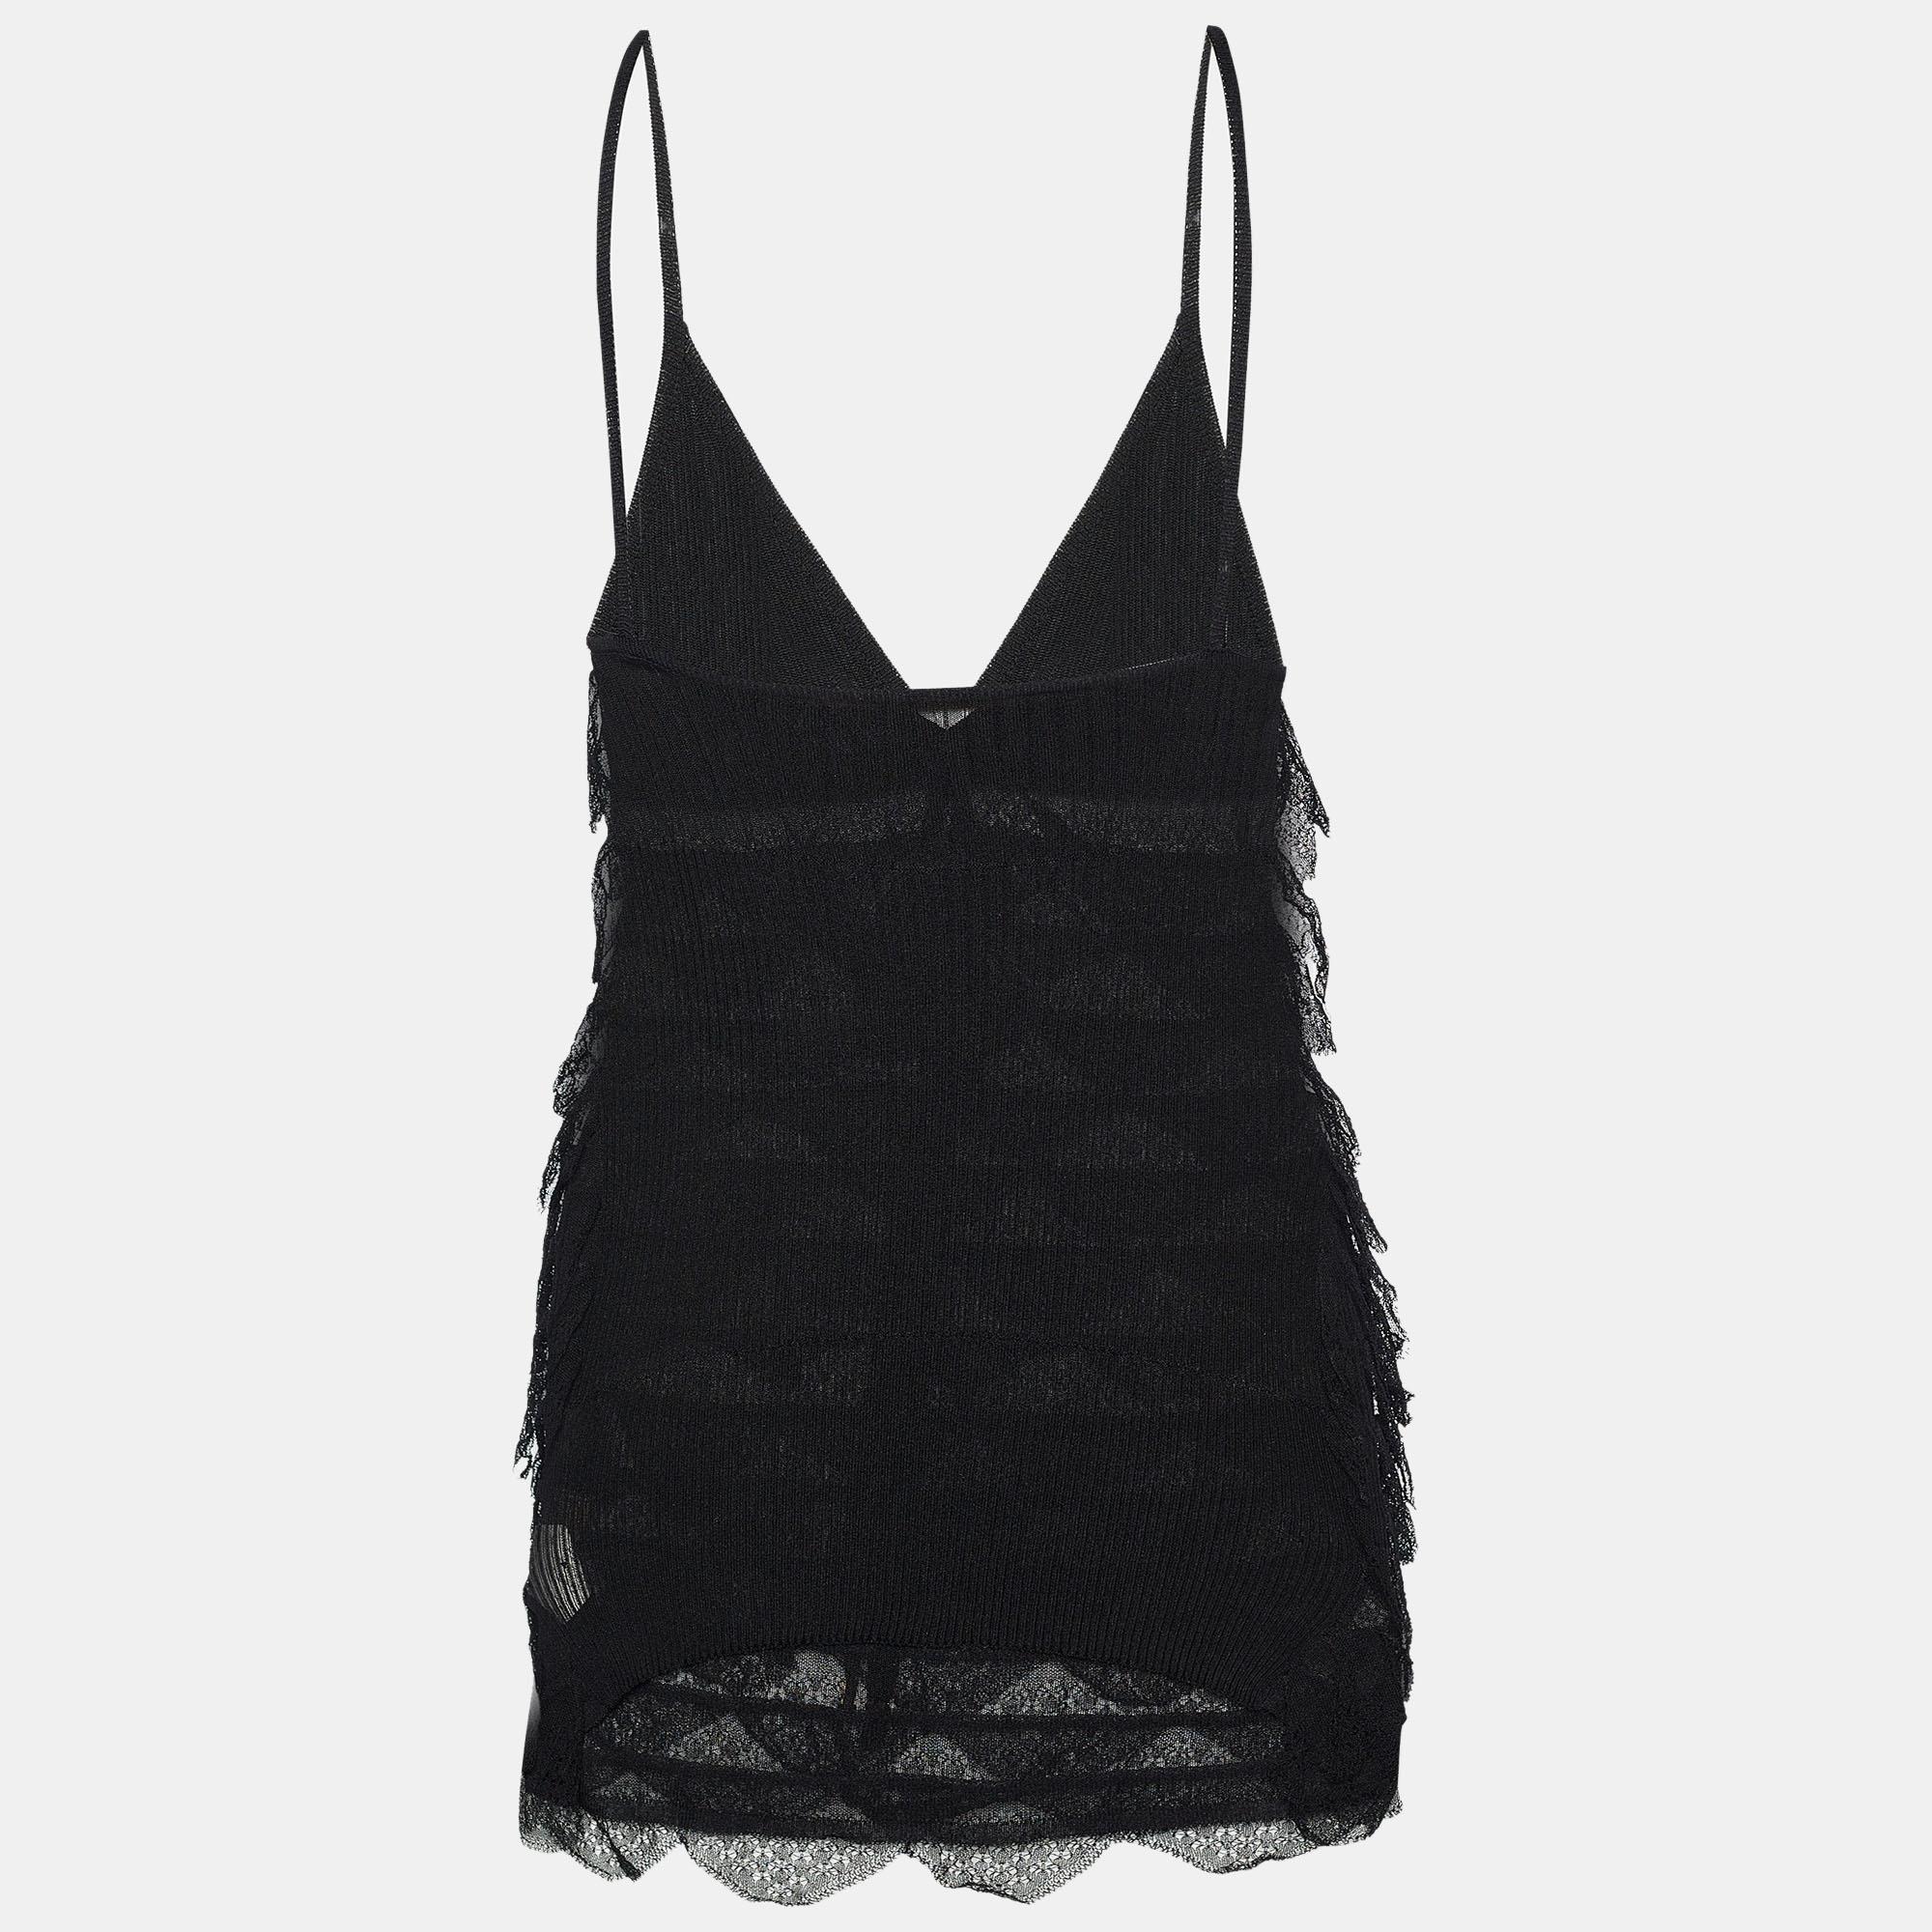 This stunning black top is truly gorgeous and perfect for those evening dinners! Made skillfully from lace, the Roberto Cavalli creation flaunts a flattering frill-detailed silhouette with a V-neckline and is sleeveless. Pair it with skirts or